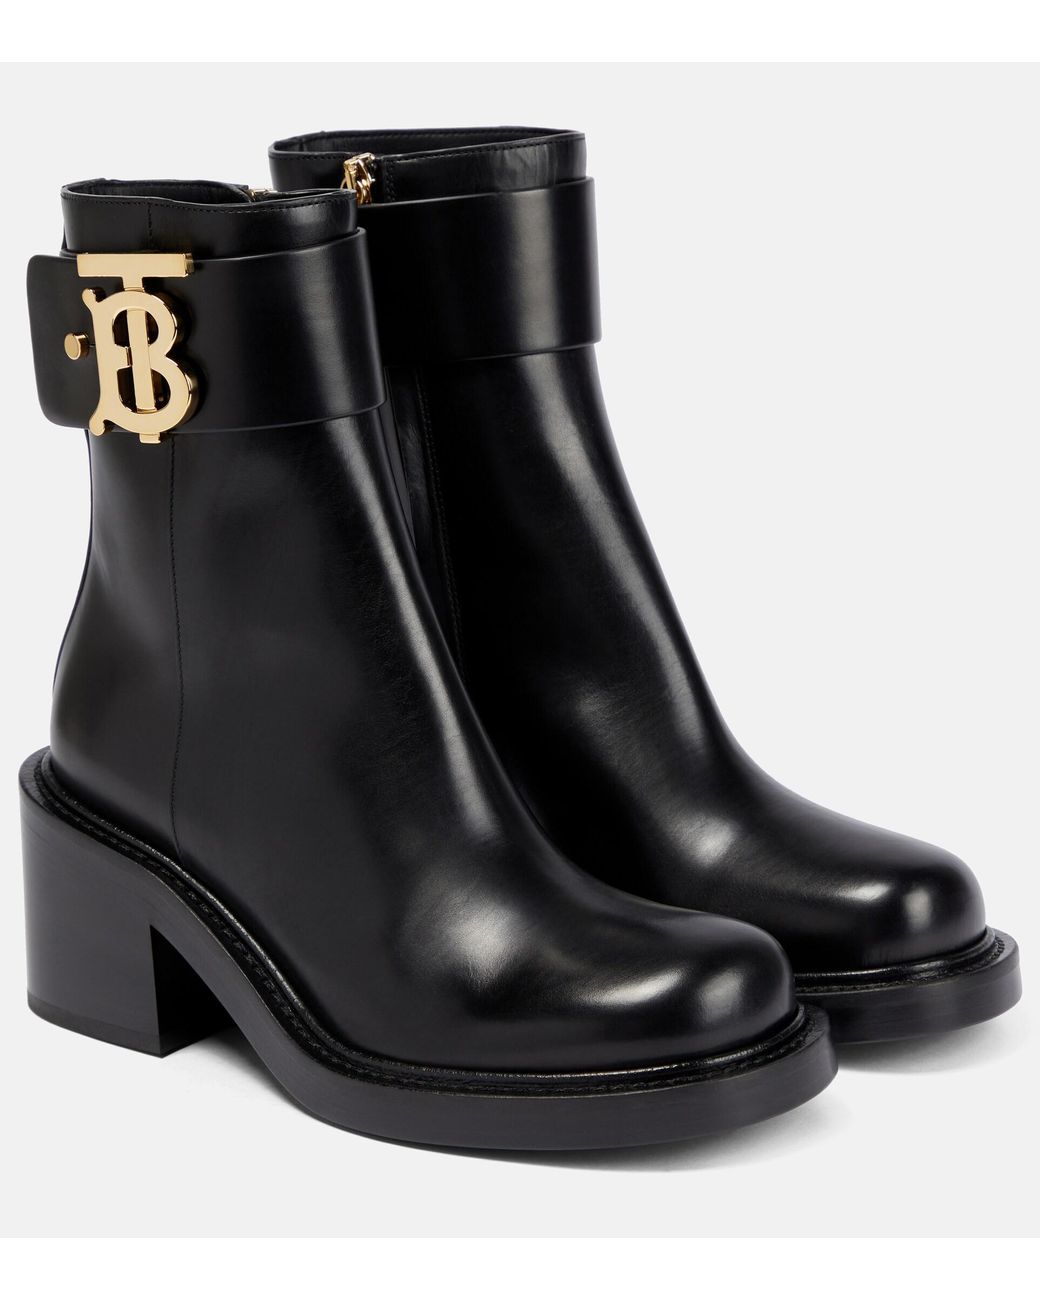 Burberry Westella Leather Ankle Boots in Black | Lyst